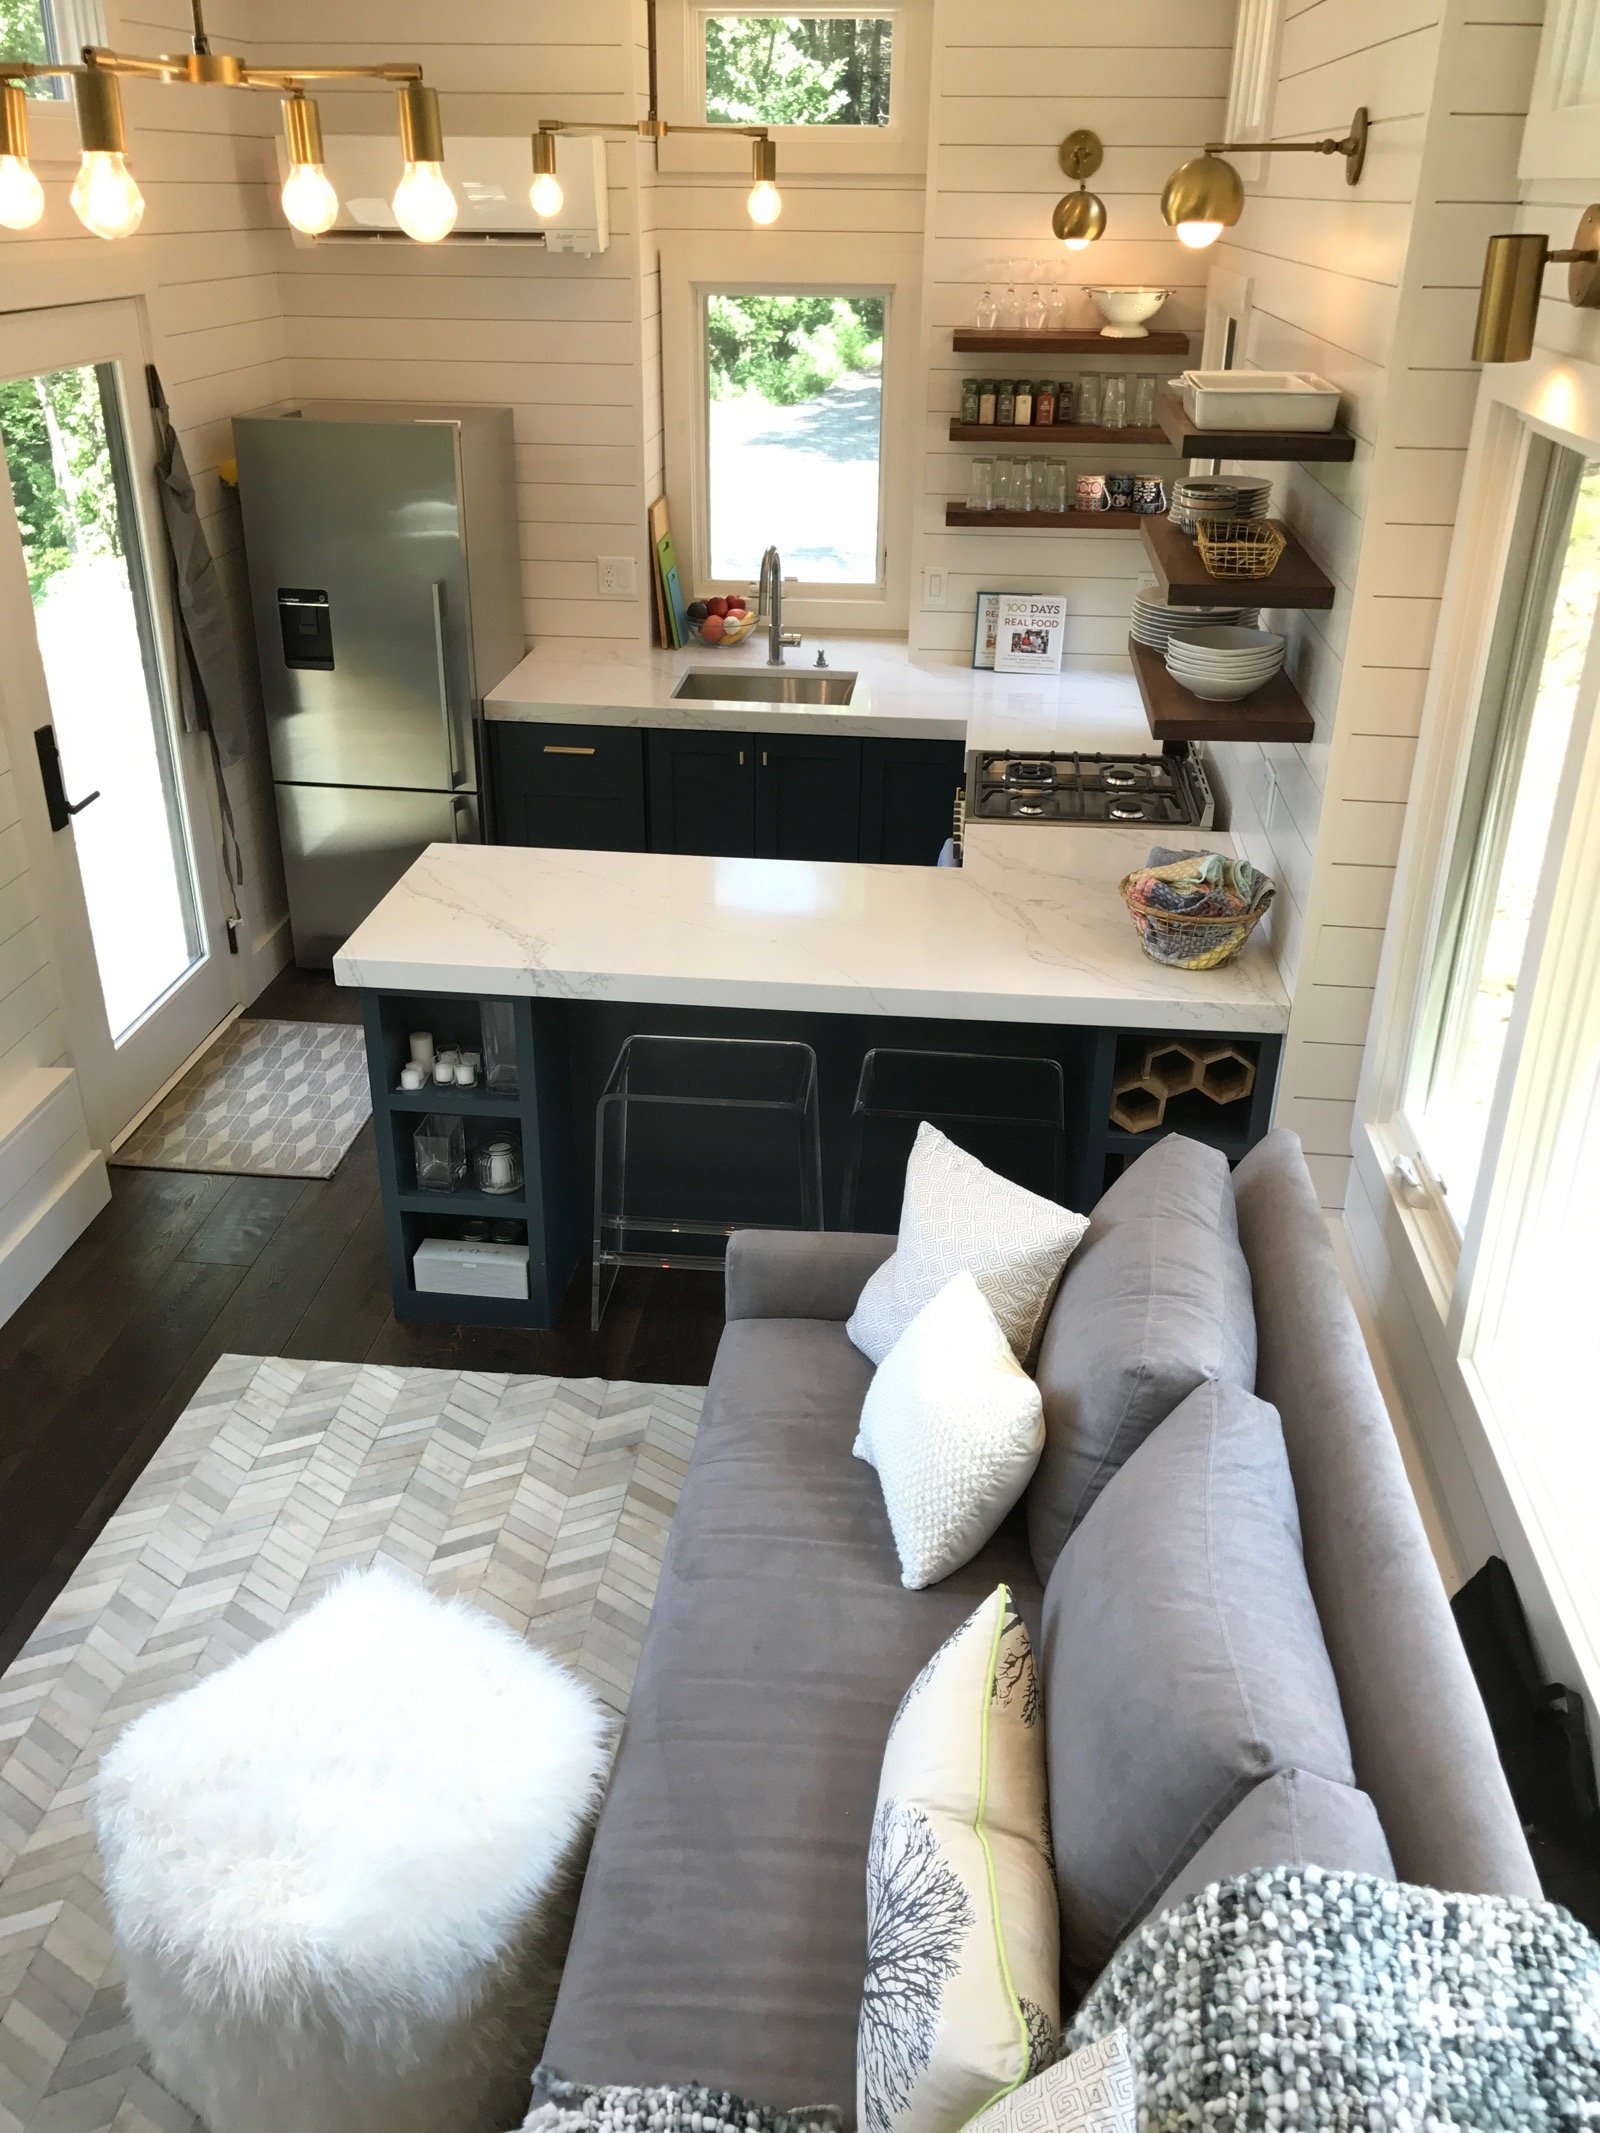 Our Tiny House on Wheels on 100 Days of Real Food